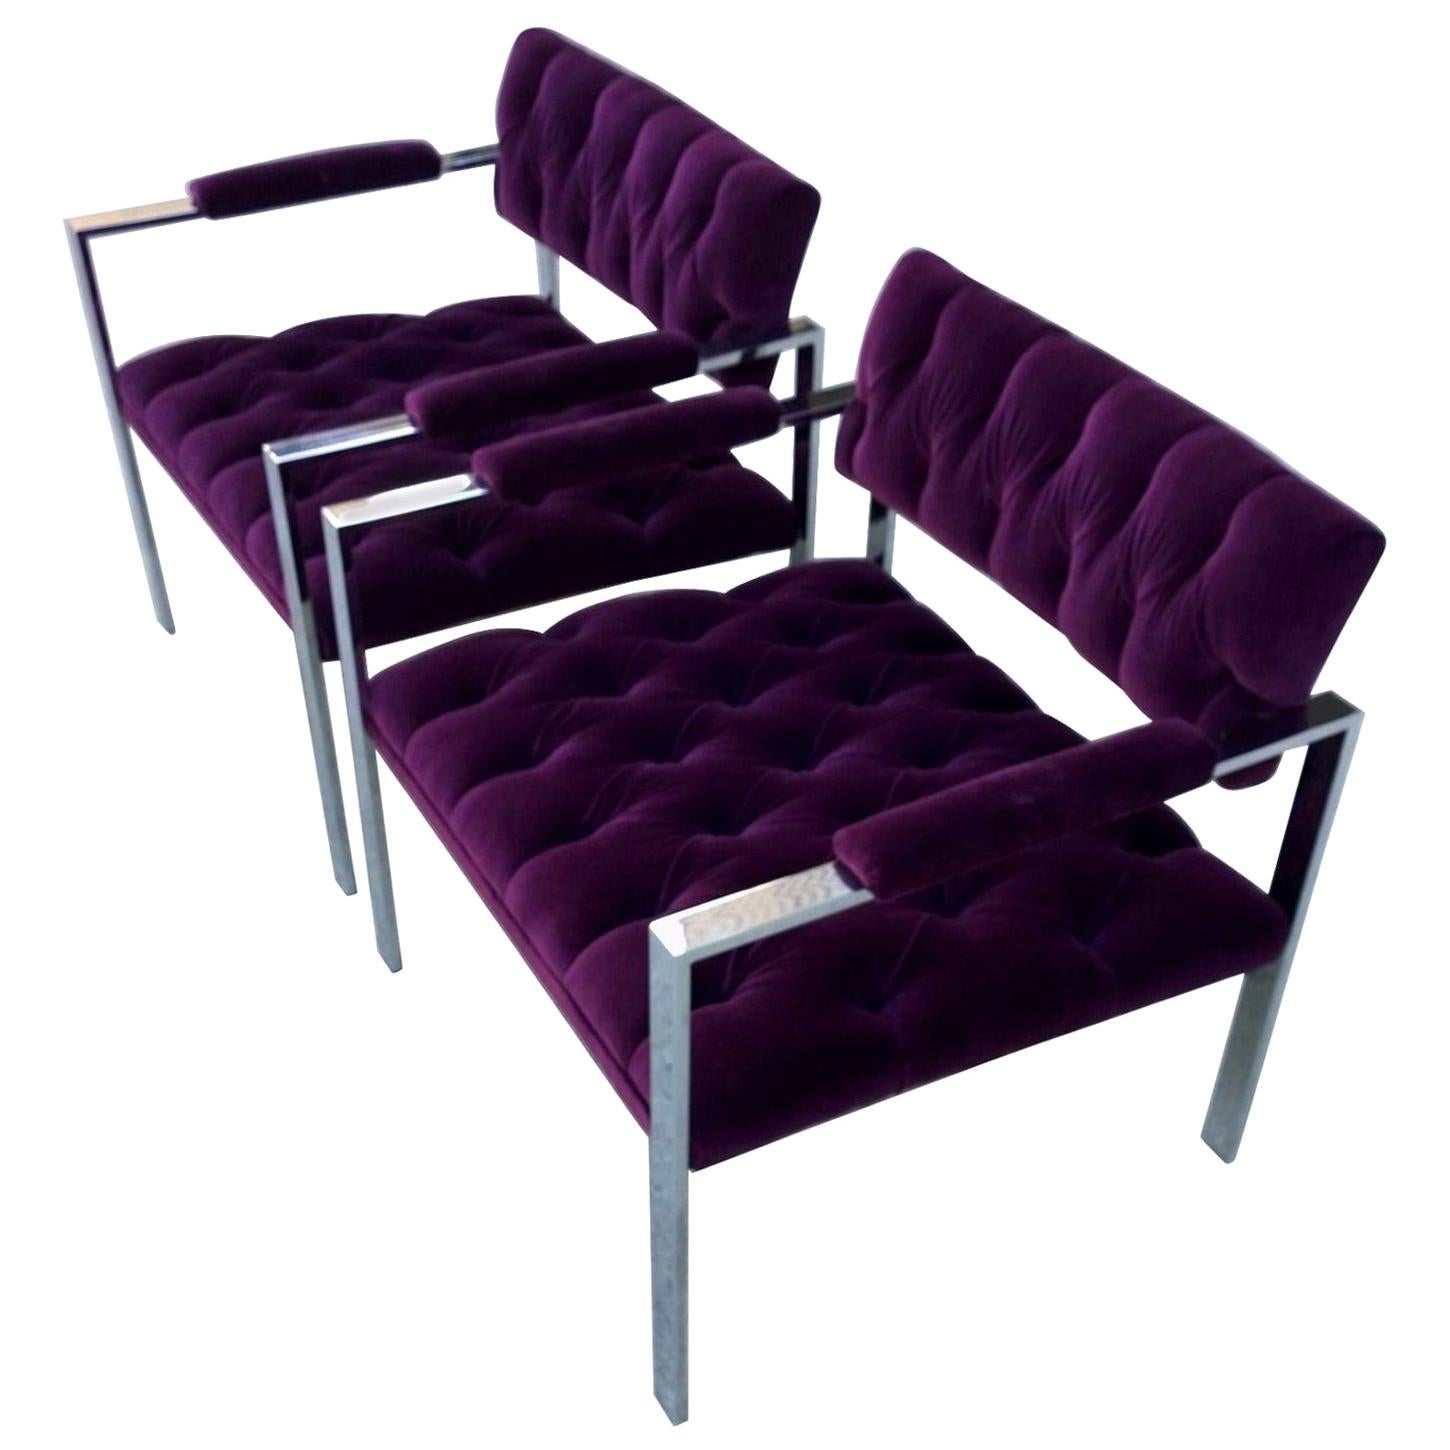 Pair of Erwin-Lambeth Chrome and New Deep Purple Velvet Tufted Arm Lounge Chairs For Sale